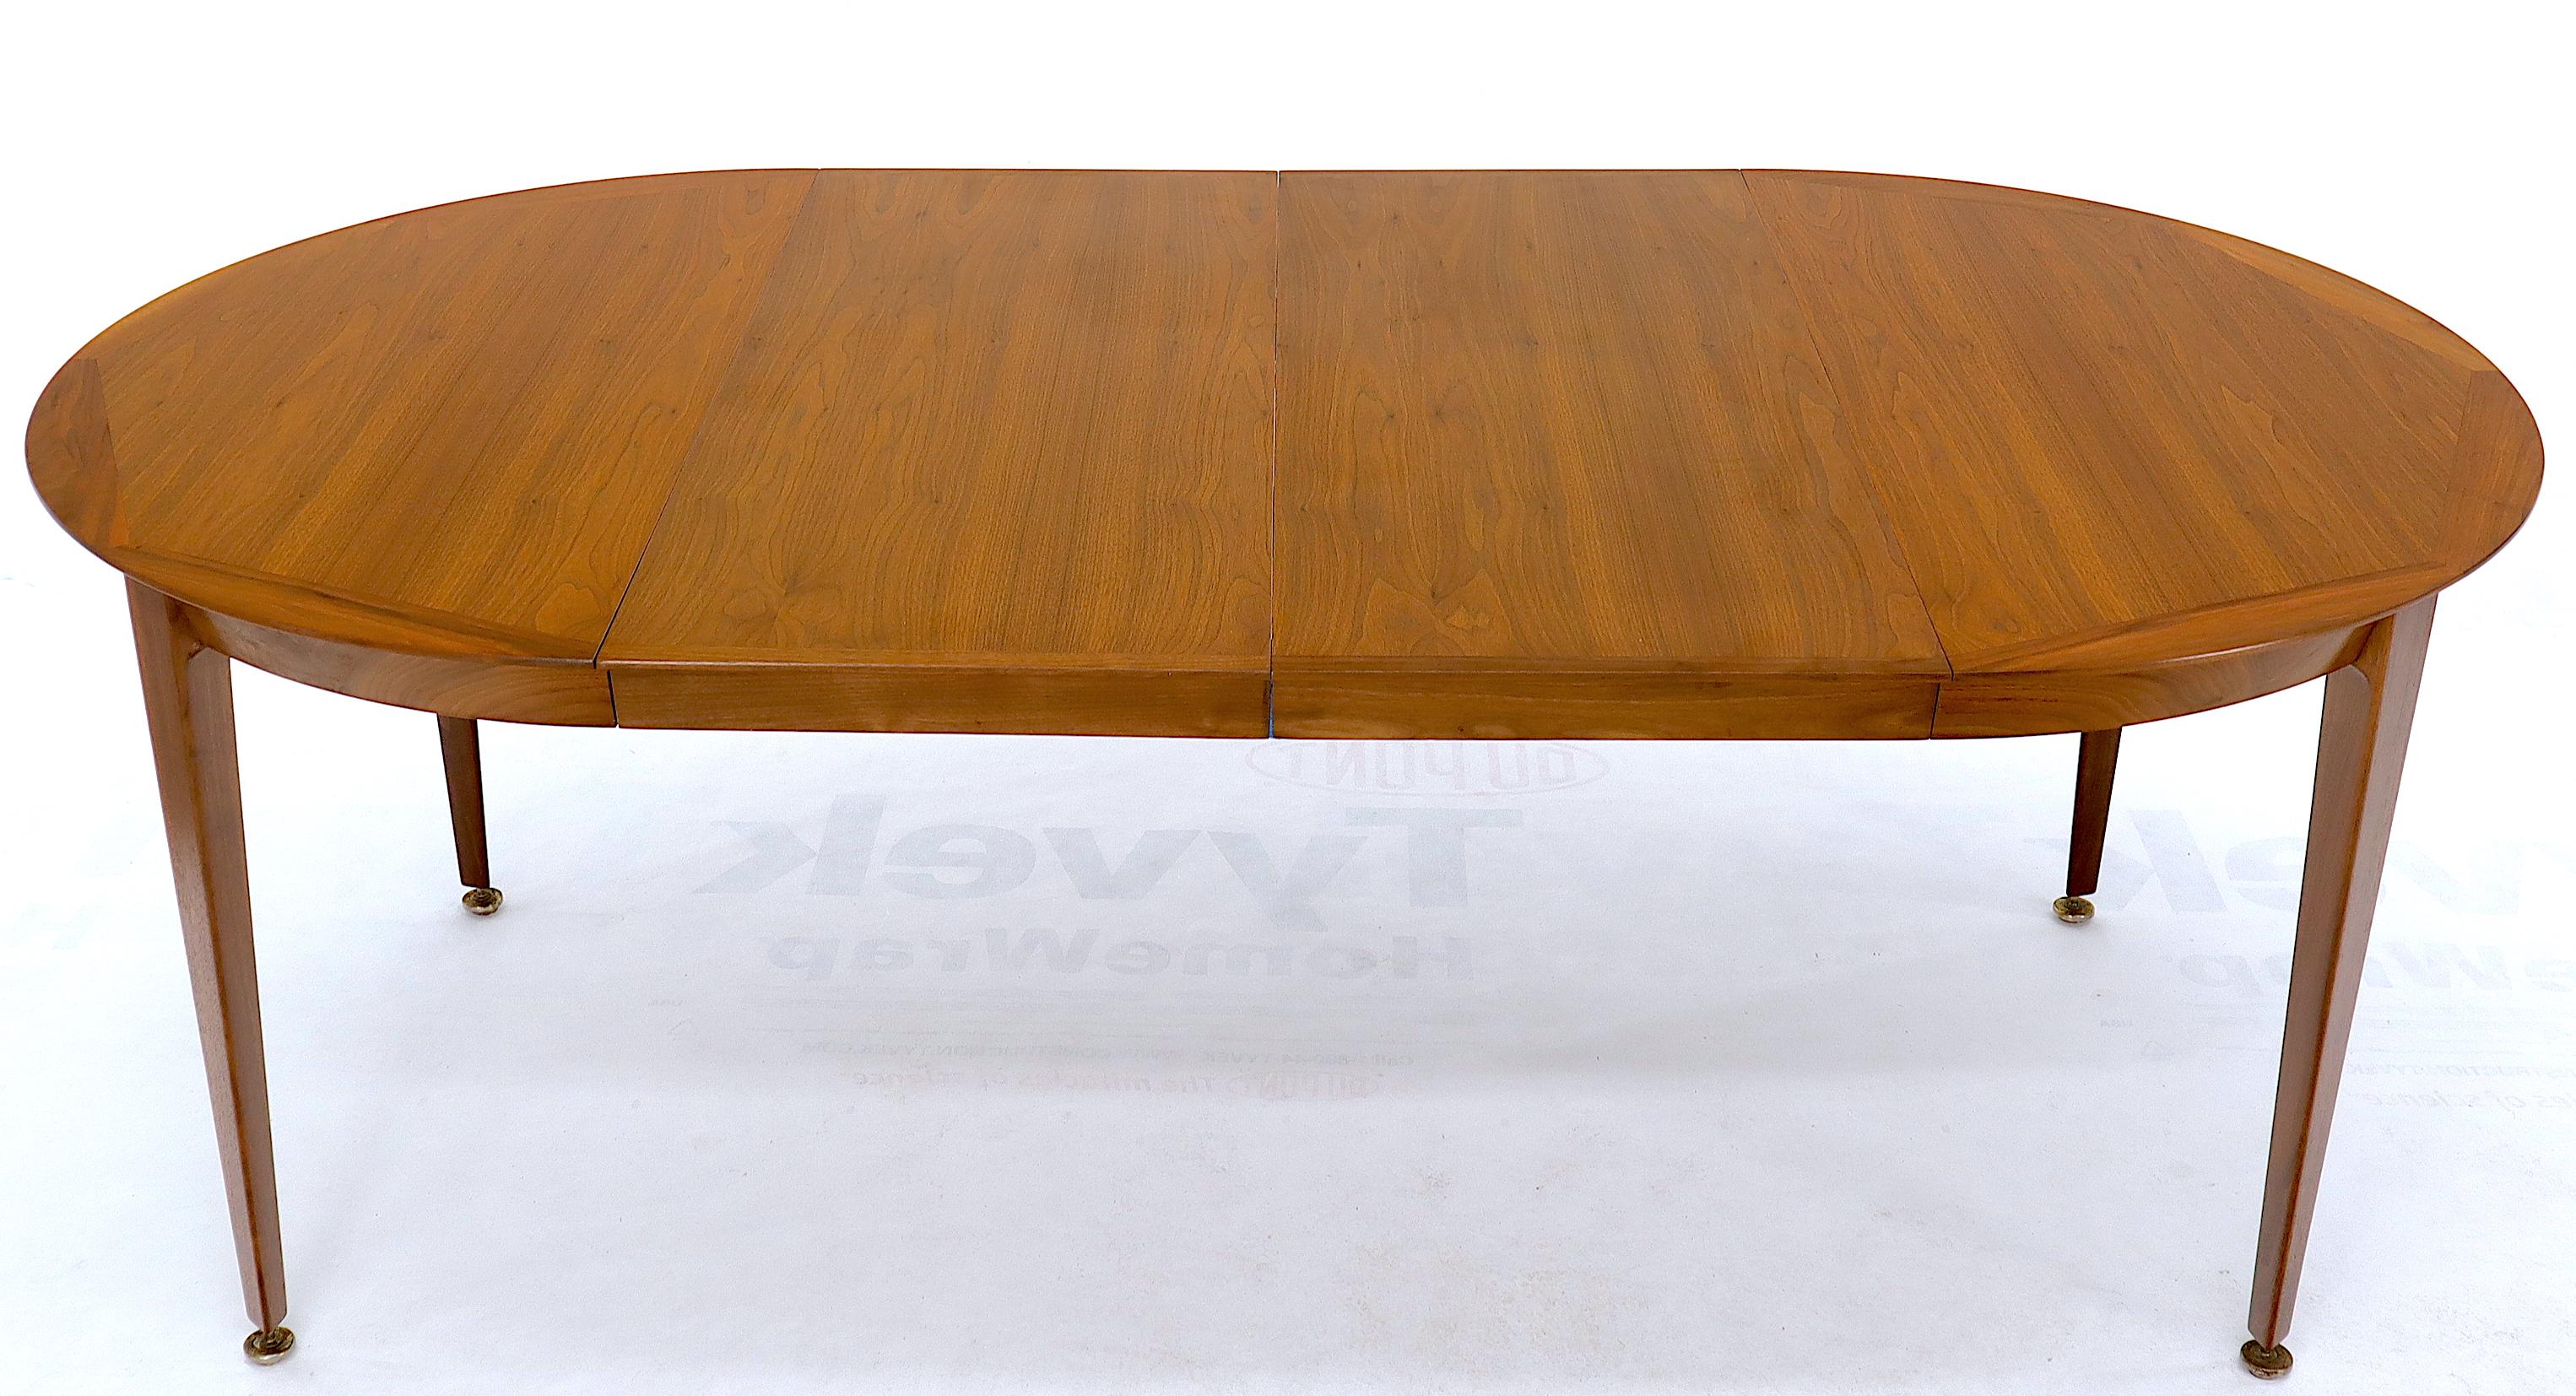 20th Century Round Walnut Tapered Legs Dining Room Table with Two Extensions Boards For Sale